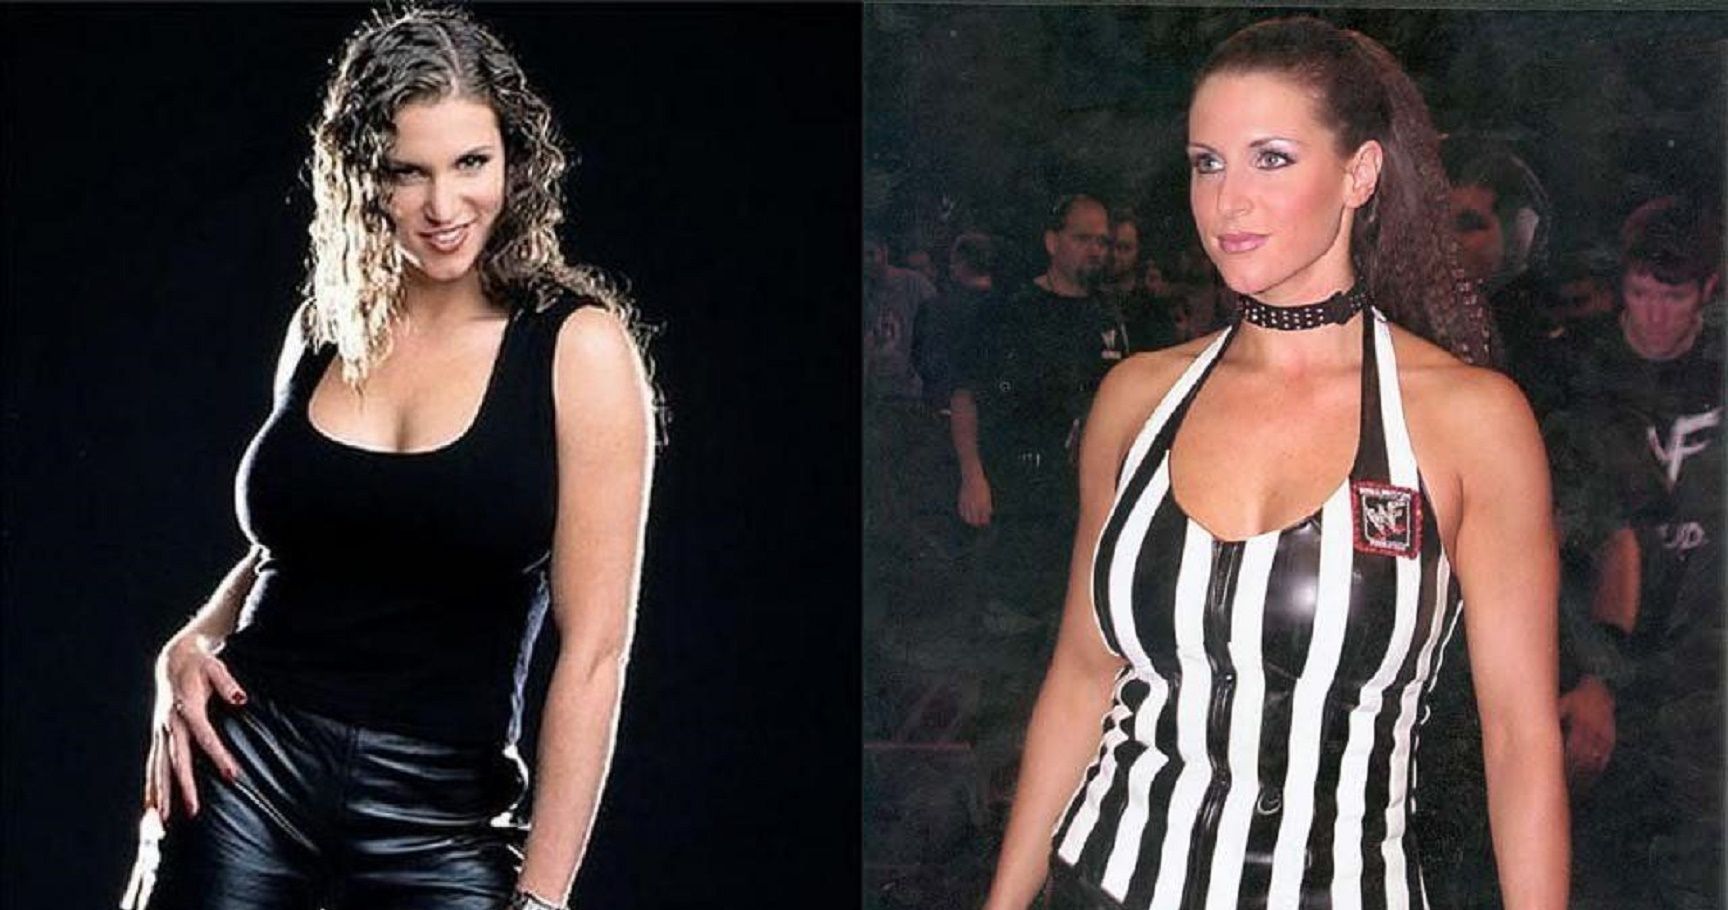 Top 20 Hot Pictures of Stephanie McMahon You NEED to